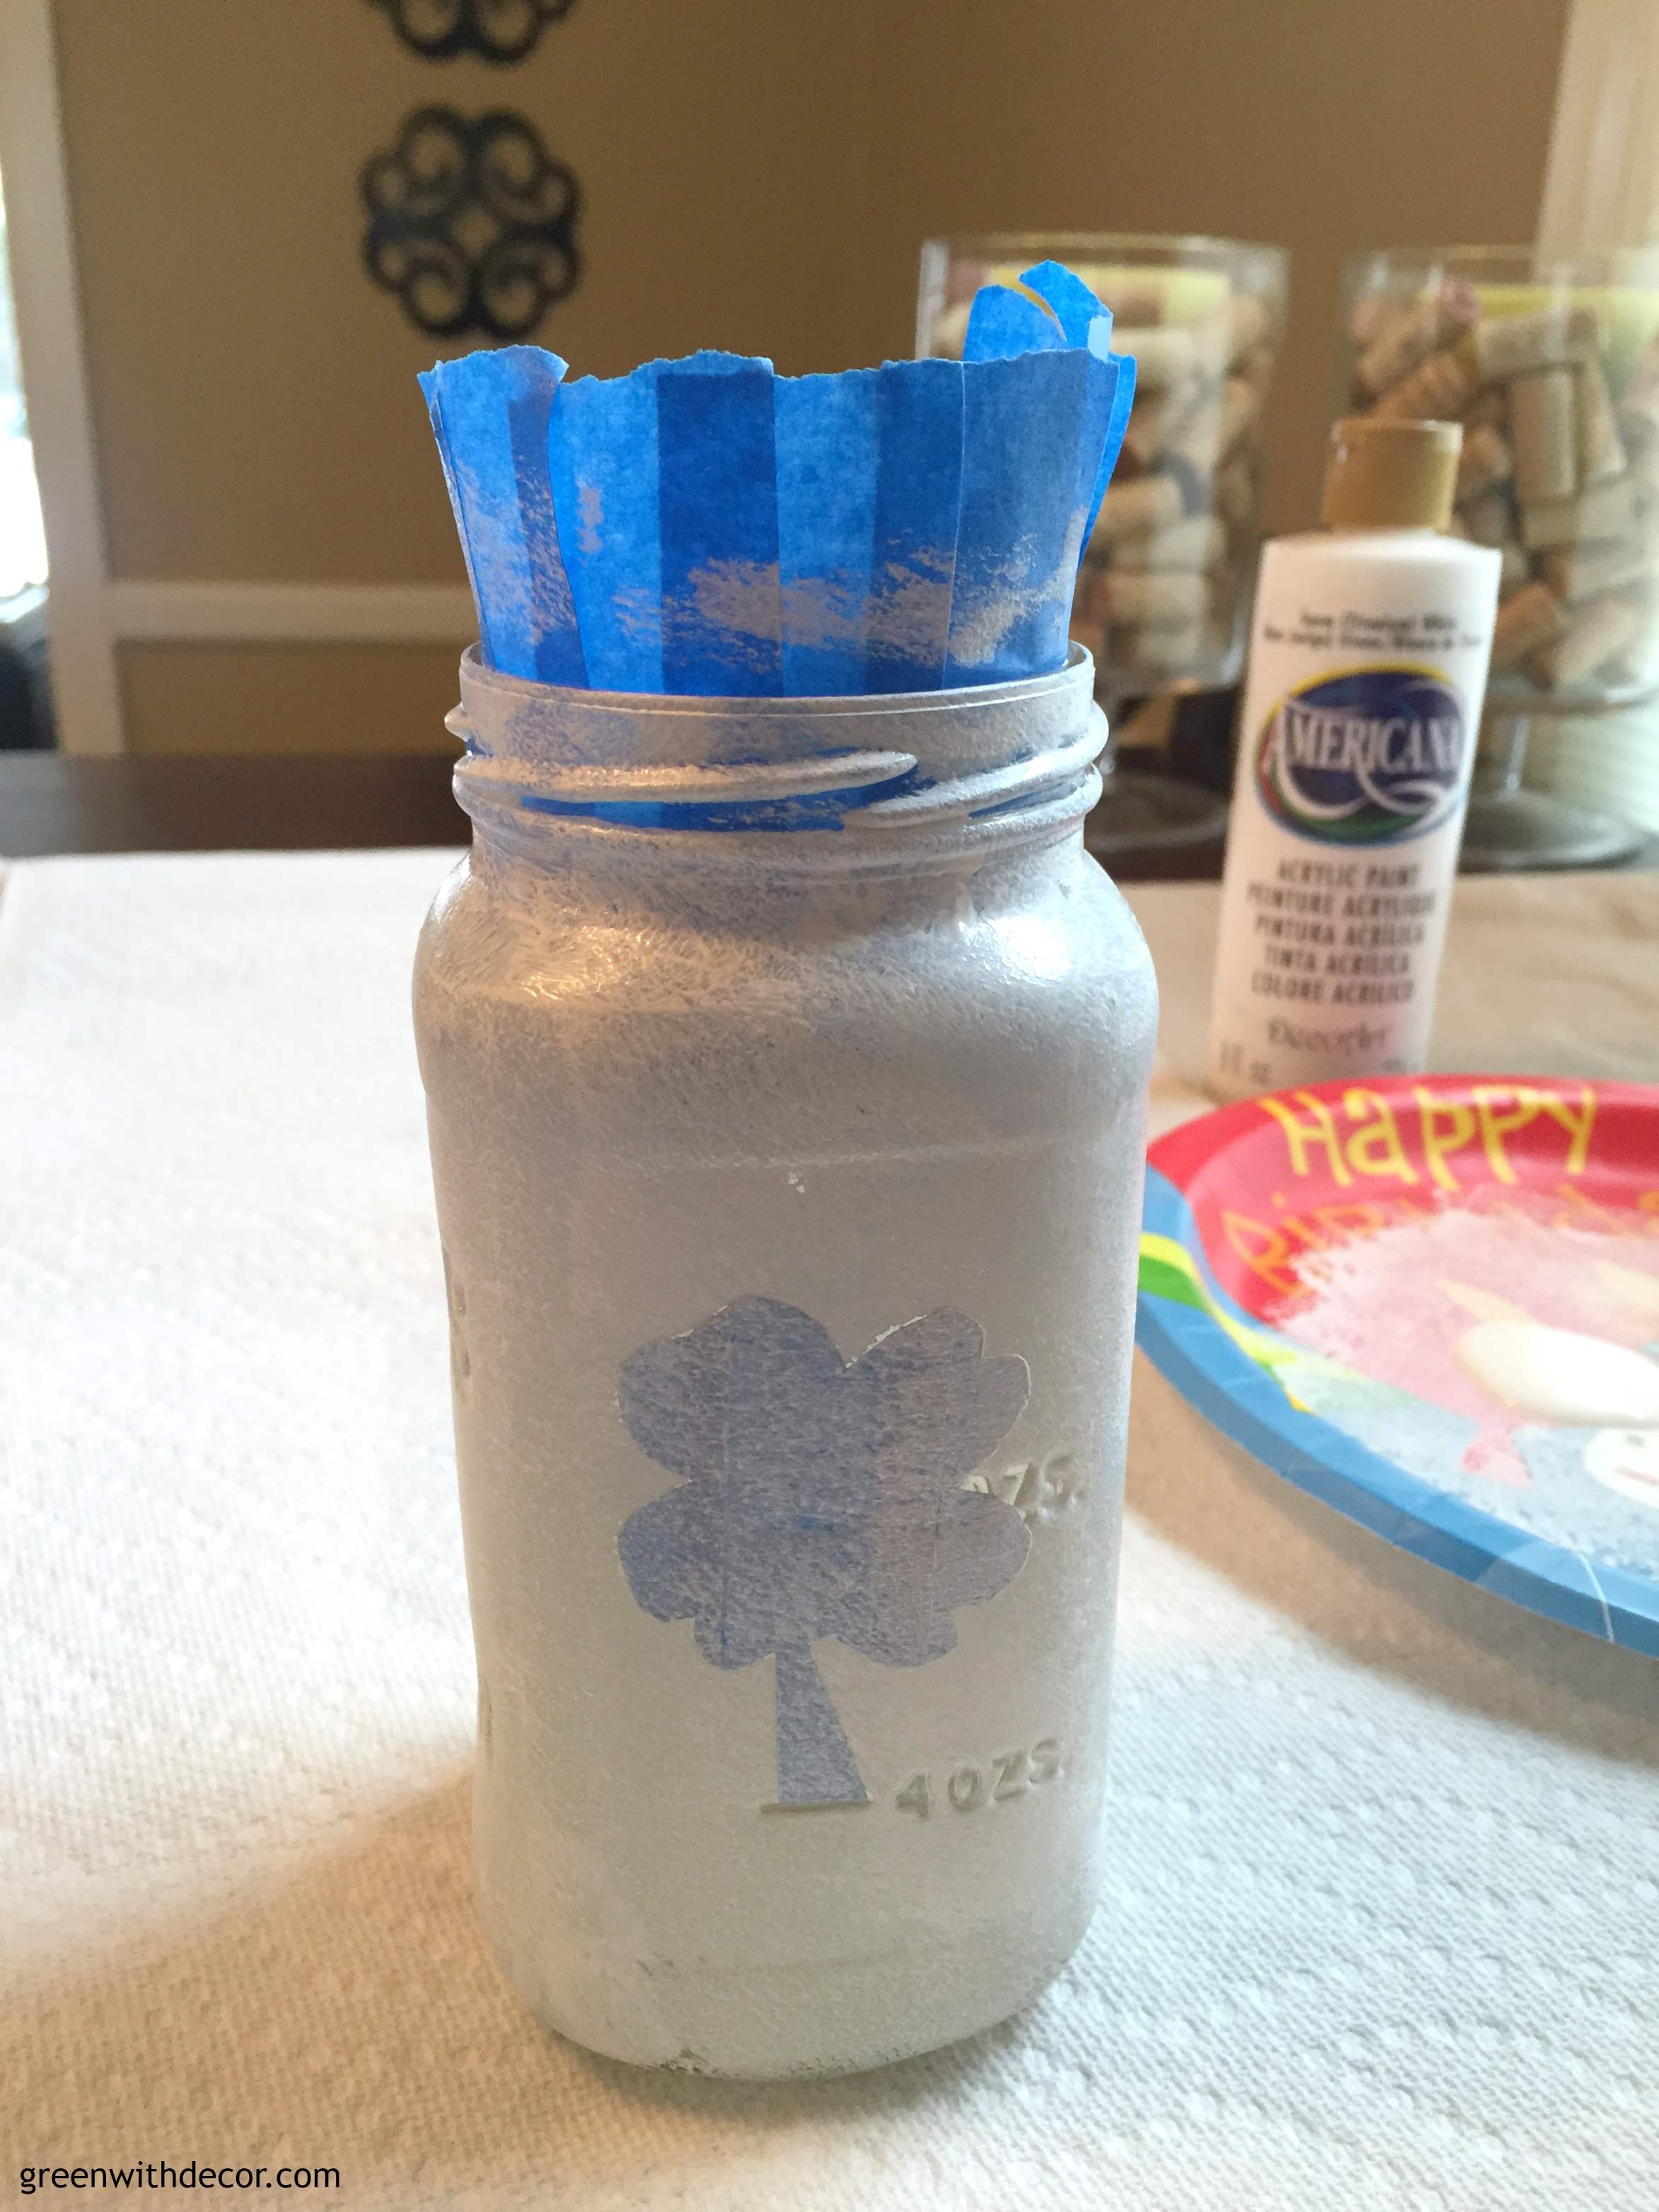 A fun St. Patrick’s Day craft with Mason jars. How cute are these? And she used old spaghetti jars instead of Mason jars, what a great idea! | Green With Decor 